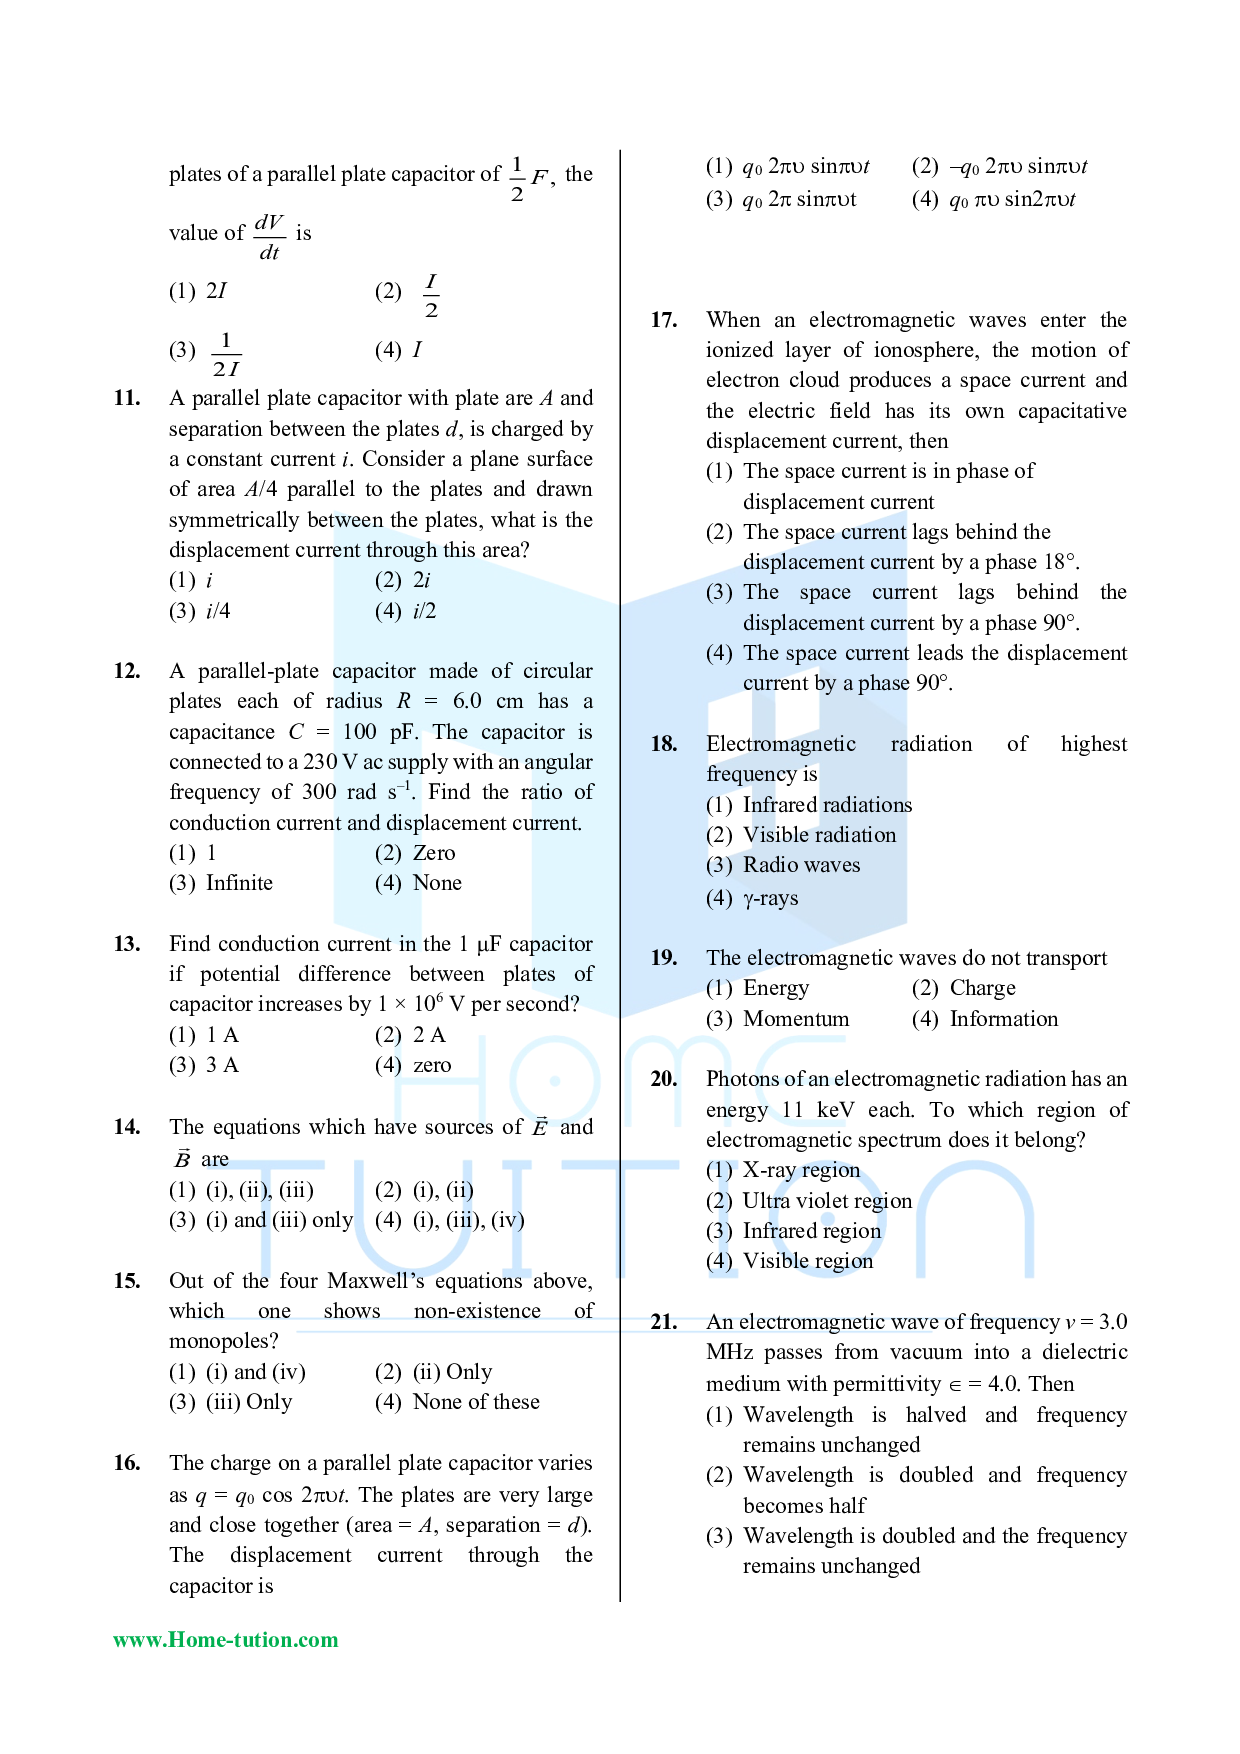 CUET MCQ Questions For Physics Chapter-08 Electromagnetic Waves